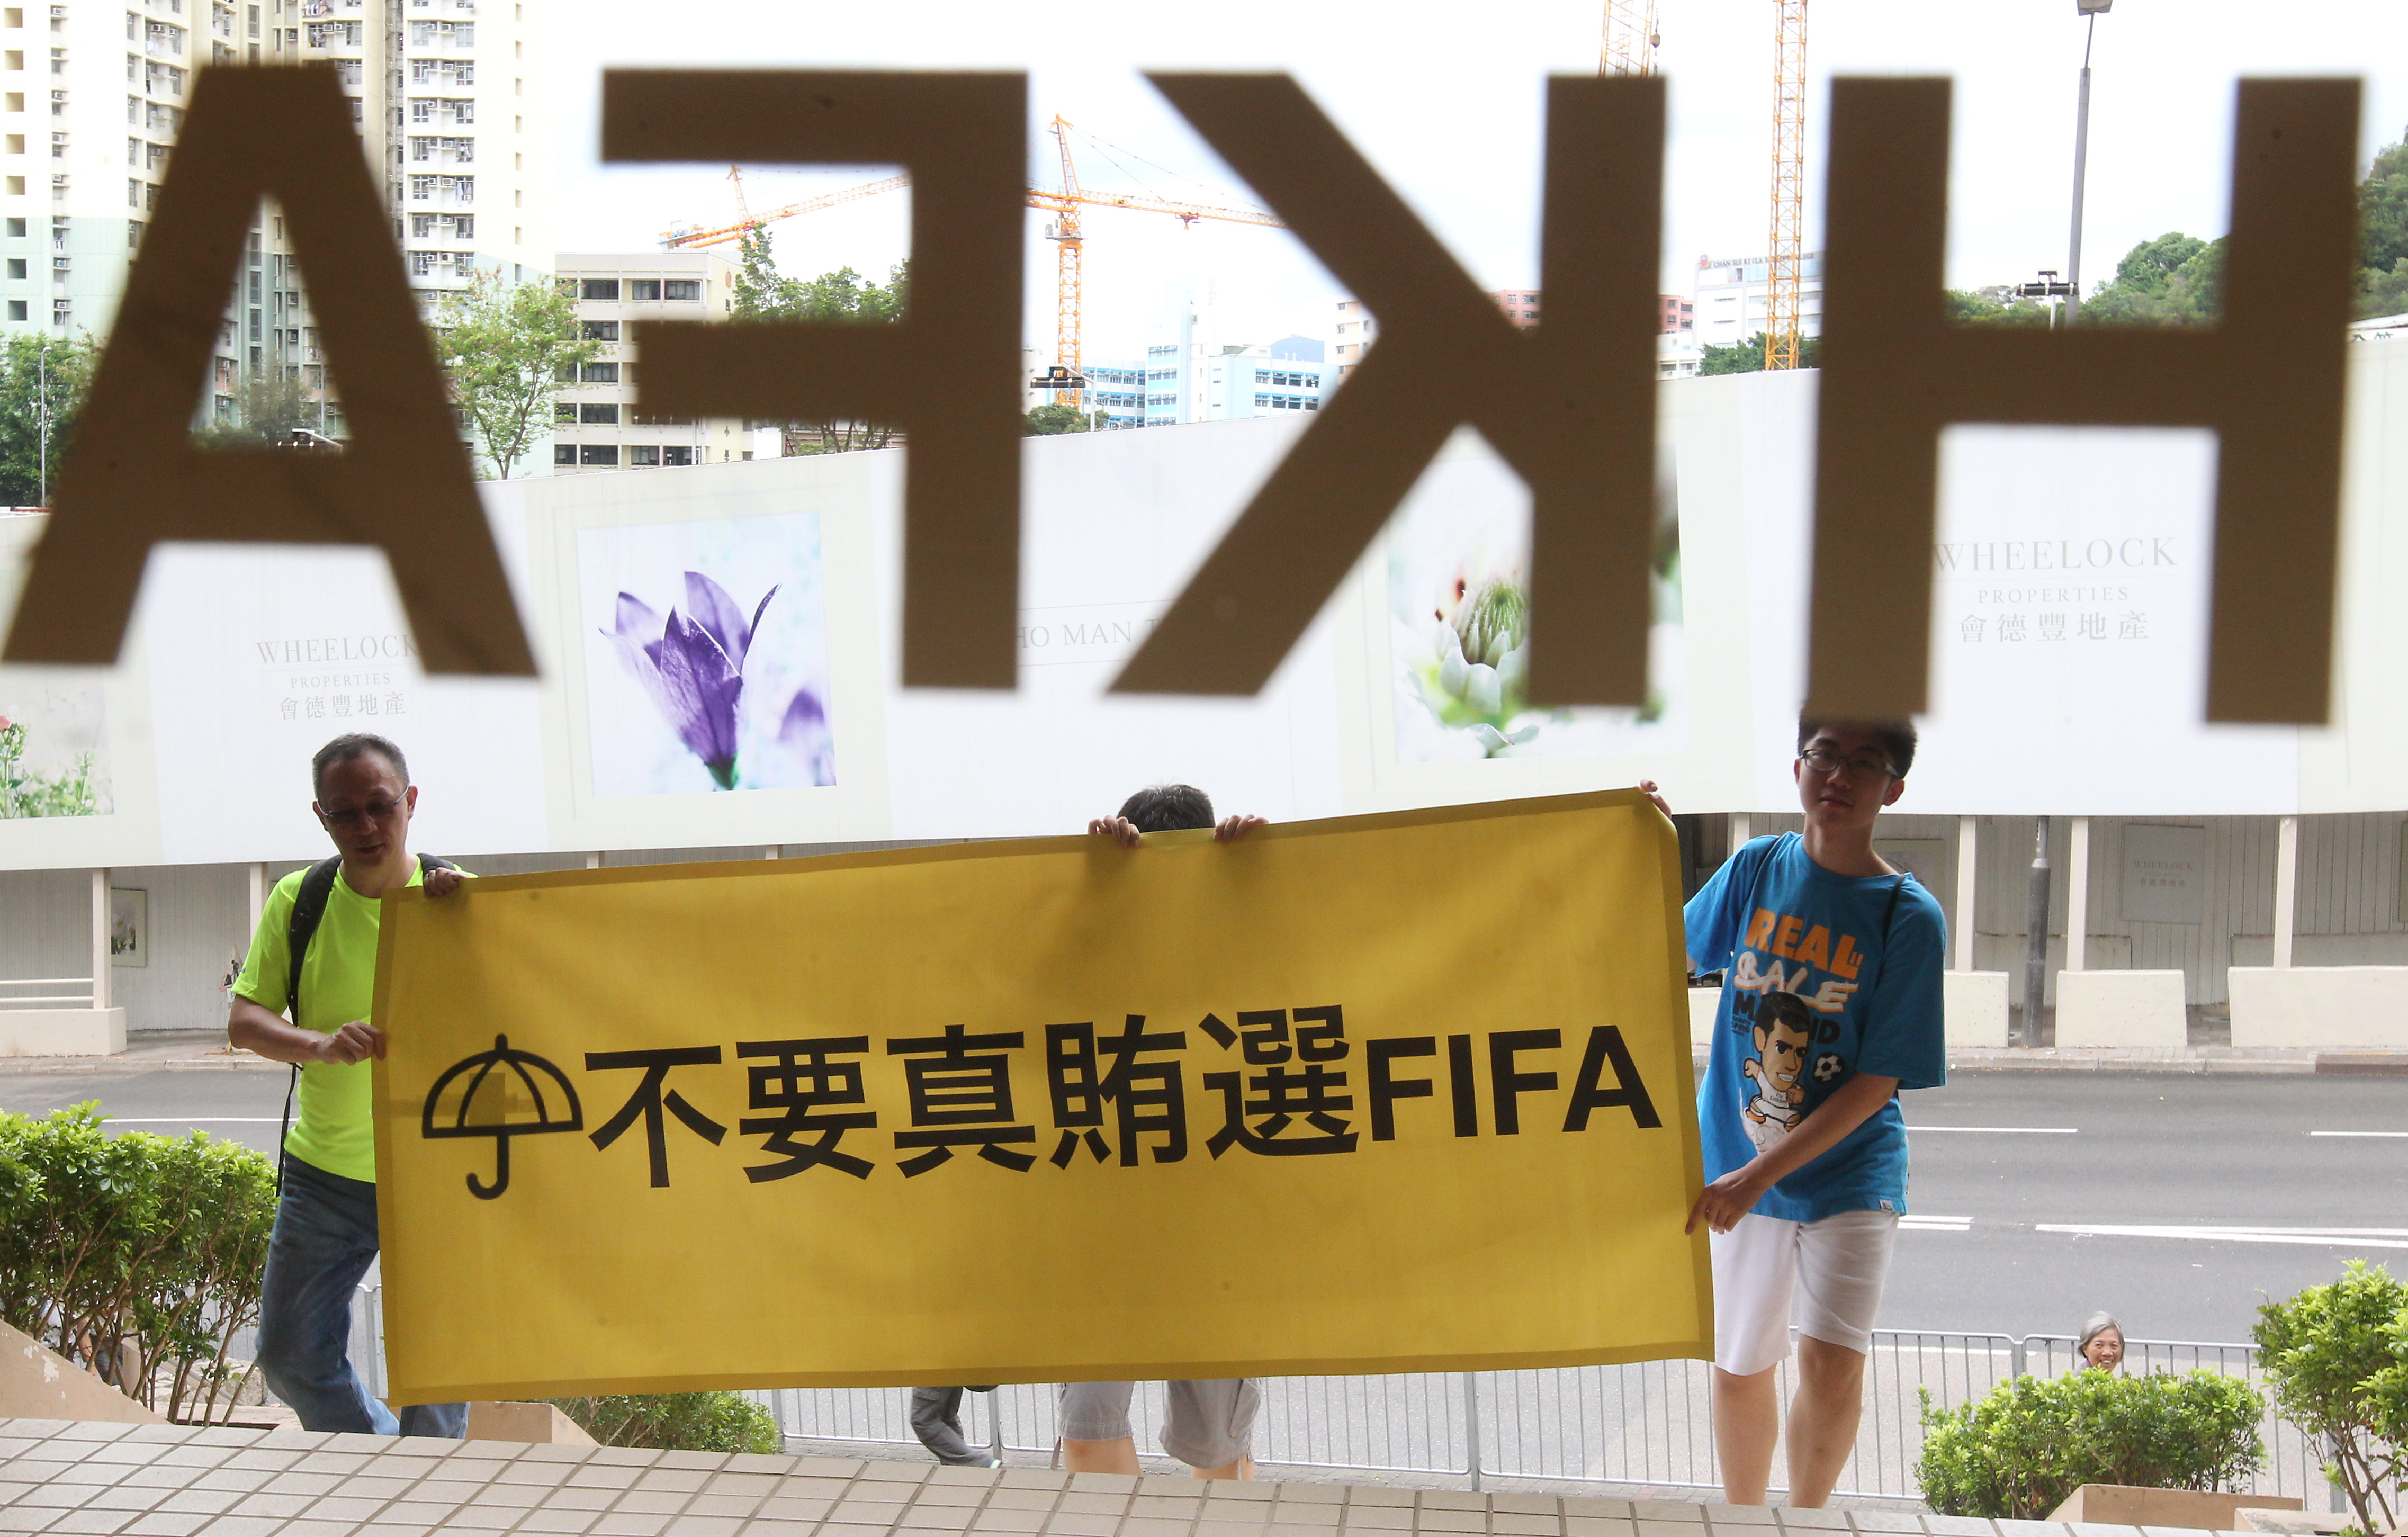 Soccer fans protest against HKFA President Timothy Fok Tsun-ting's decision to support Sepp Blatter as FIFA President outside Football Association in Ho Man Tin. Photo: Dickson Lee